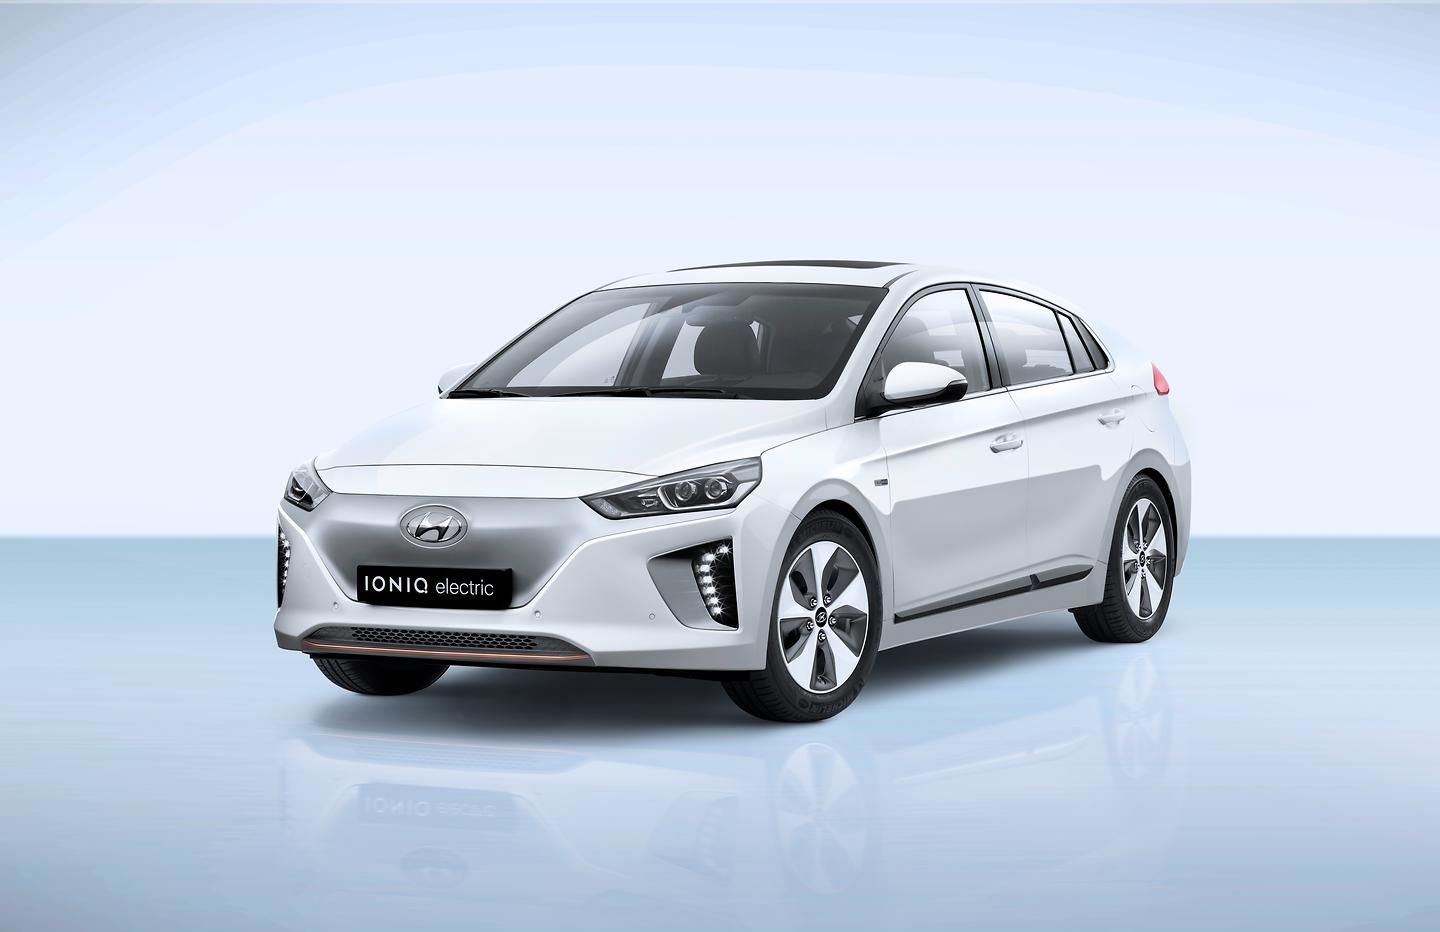 Dedicated to Disrupt - the All-New Hyundai IONIQ Line-Up: Hybrid, Plug-in, Electric